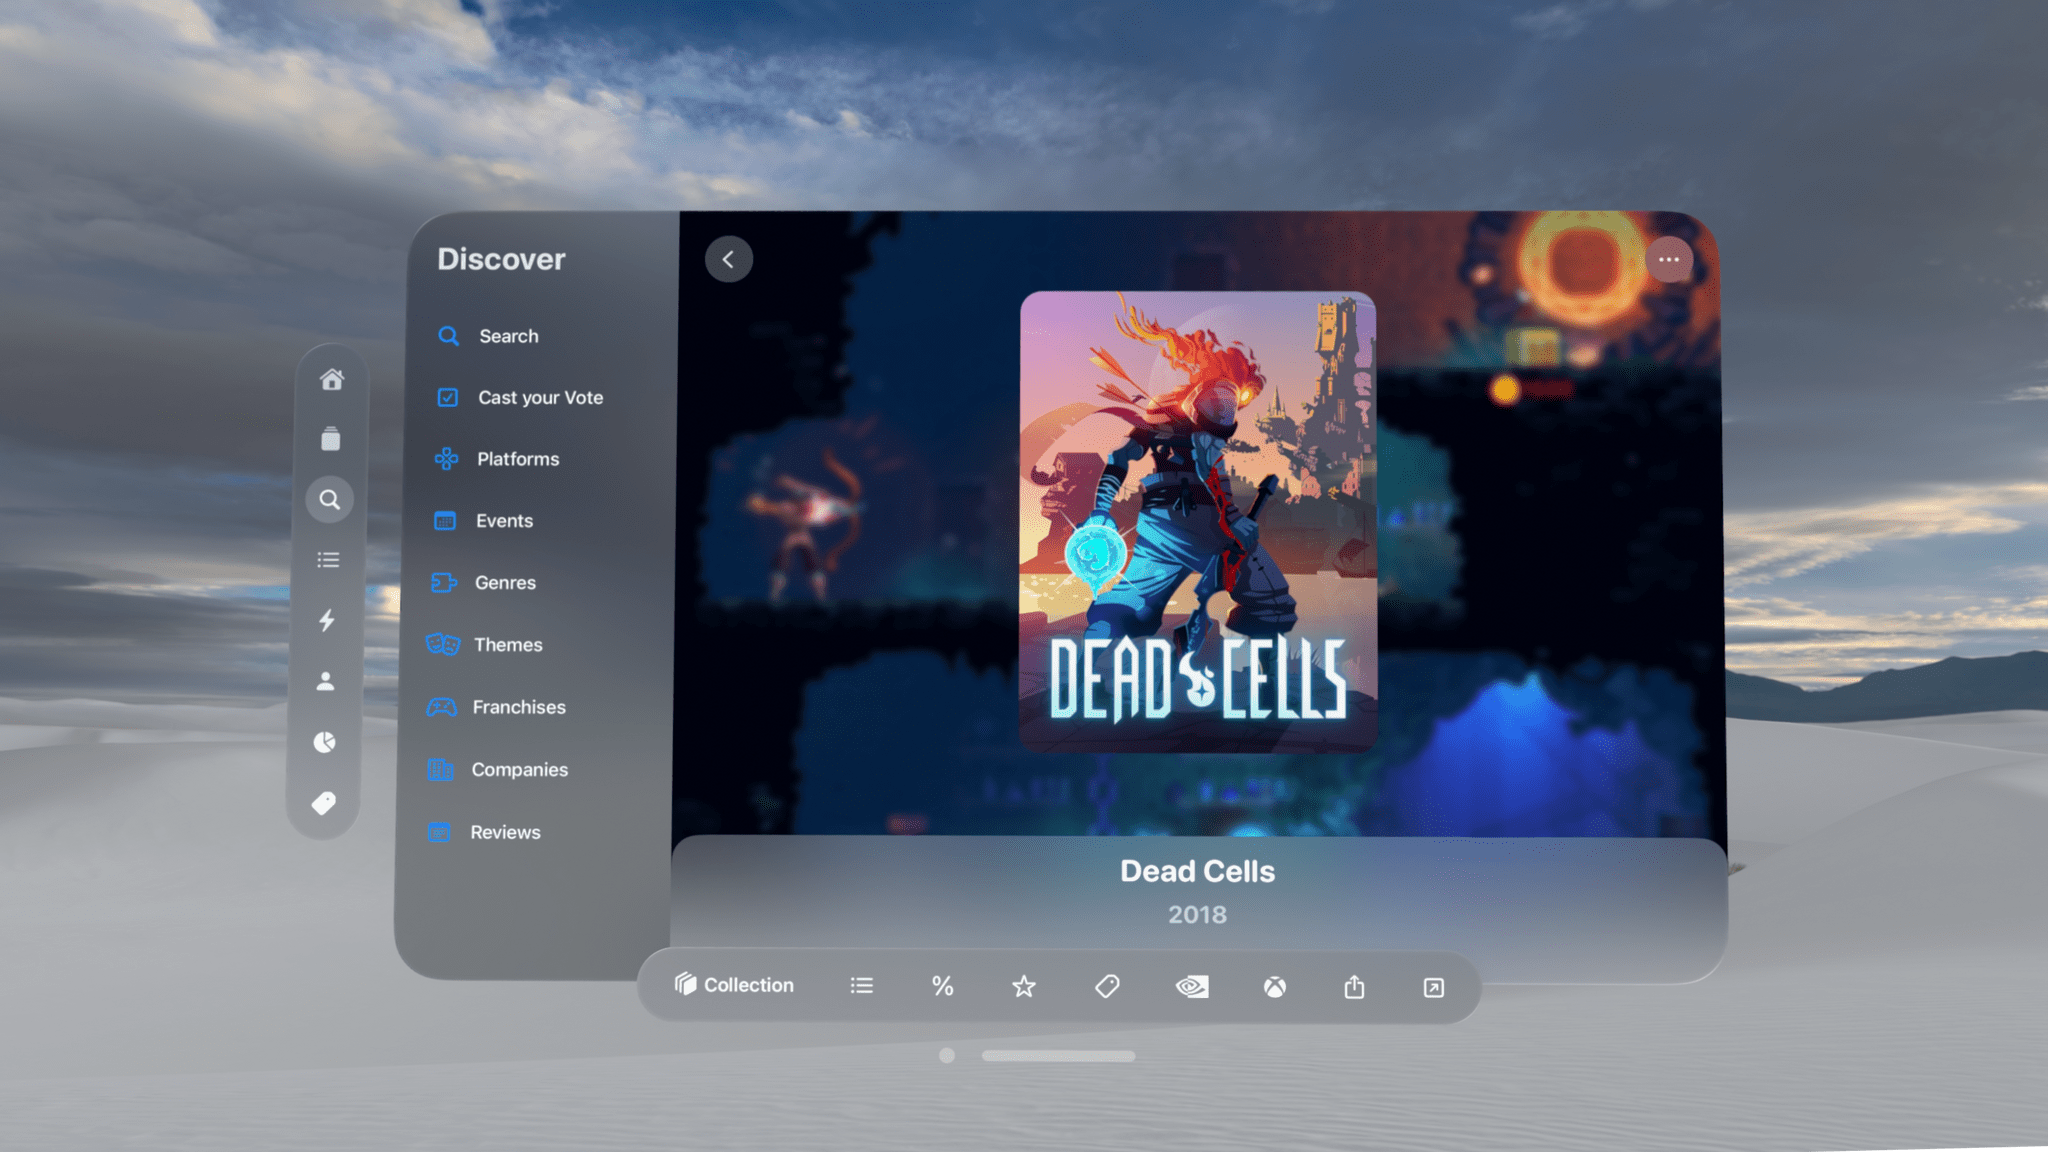 Dead Cells is available via GeForce NOW.